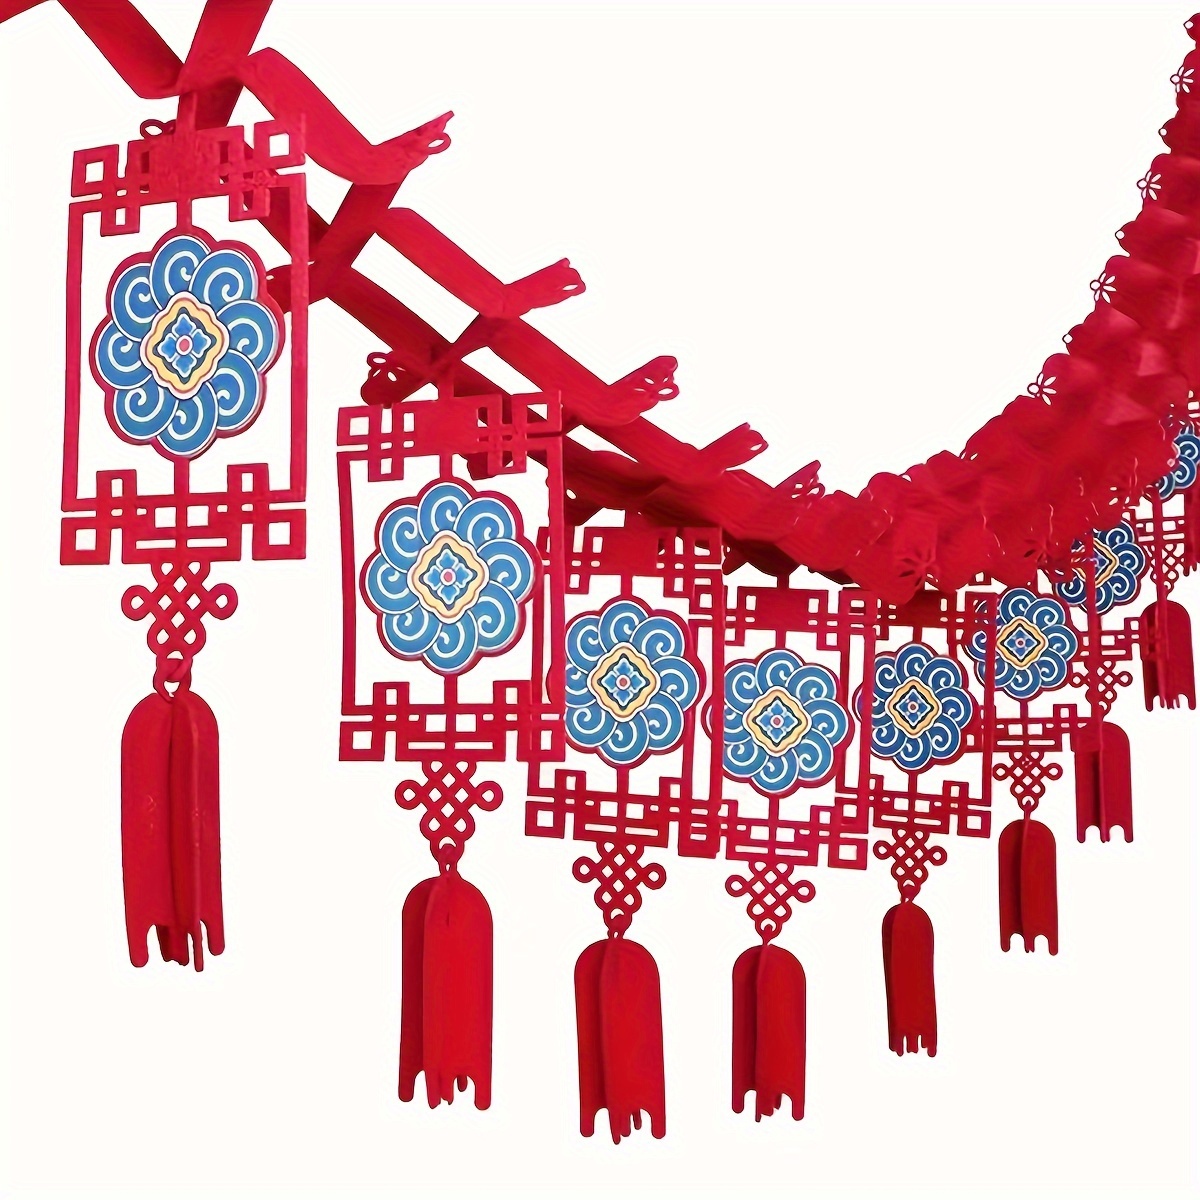 Chinese New Year Dragon Ceiling Decorations, 2022 Chinese New Year Decor for Shops, Restaurant, Party, Home & Chinatown